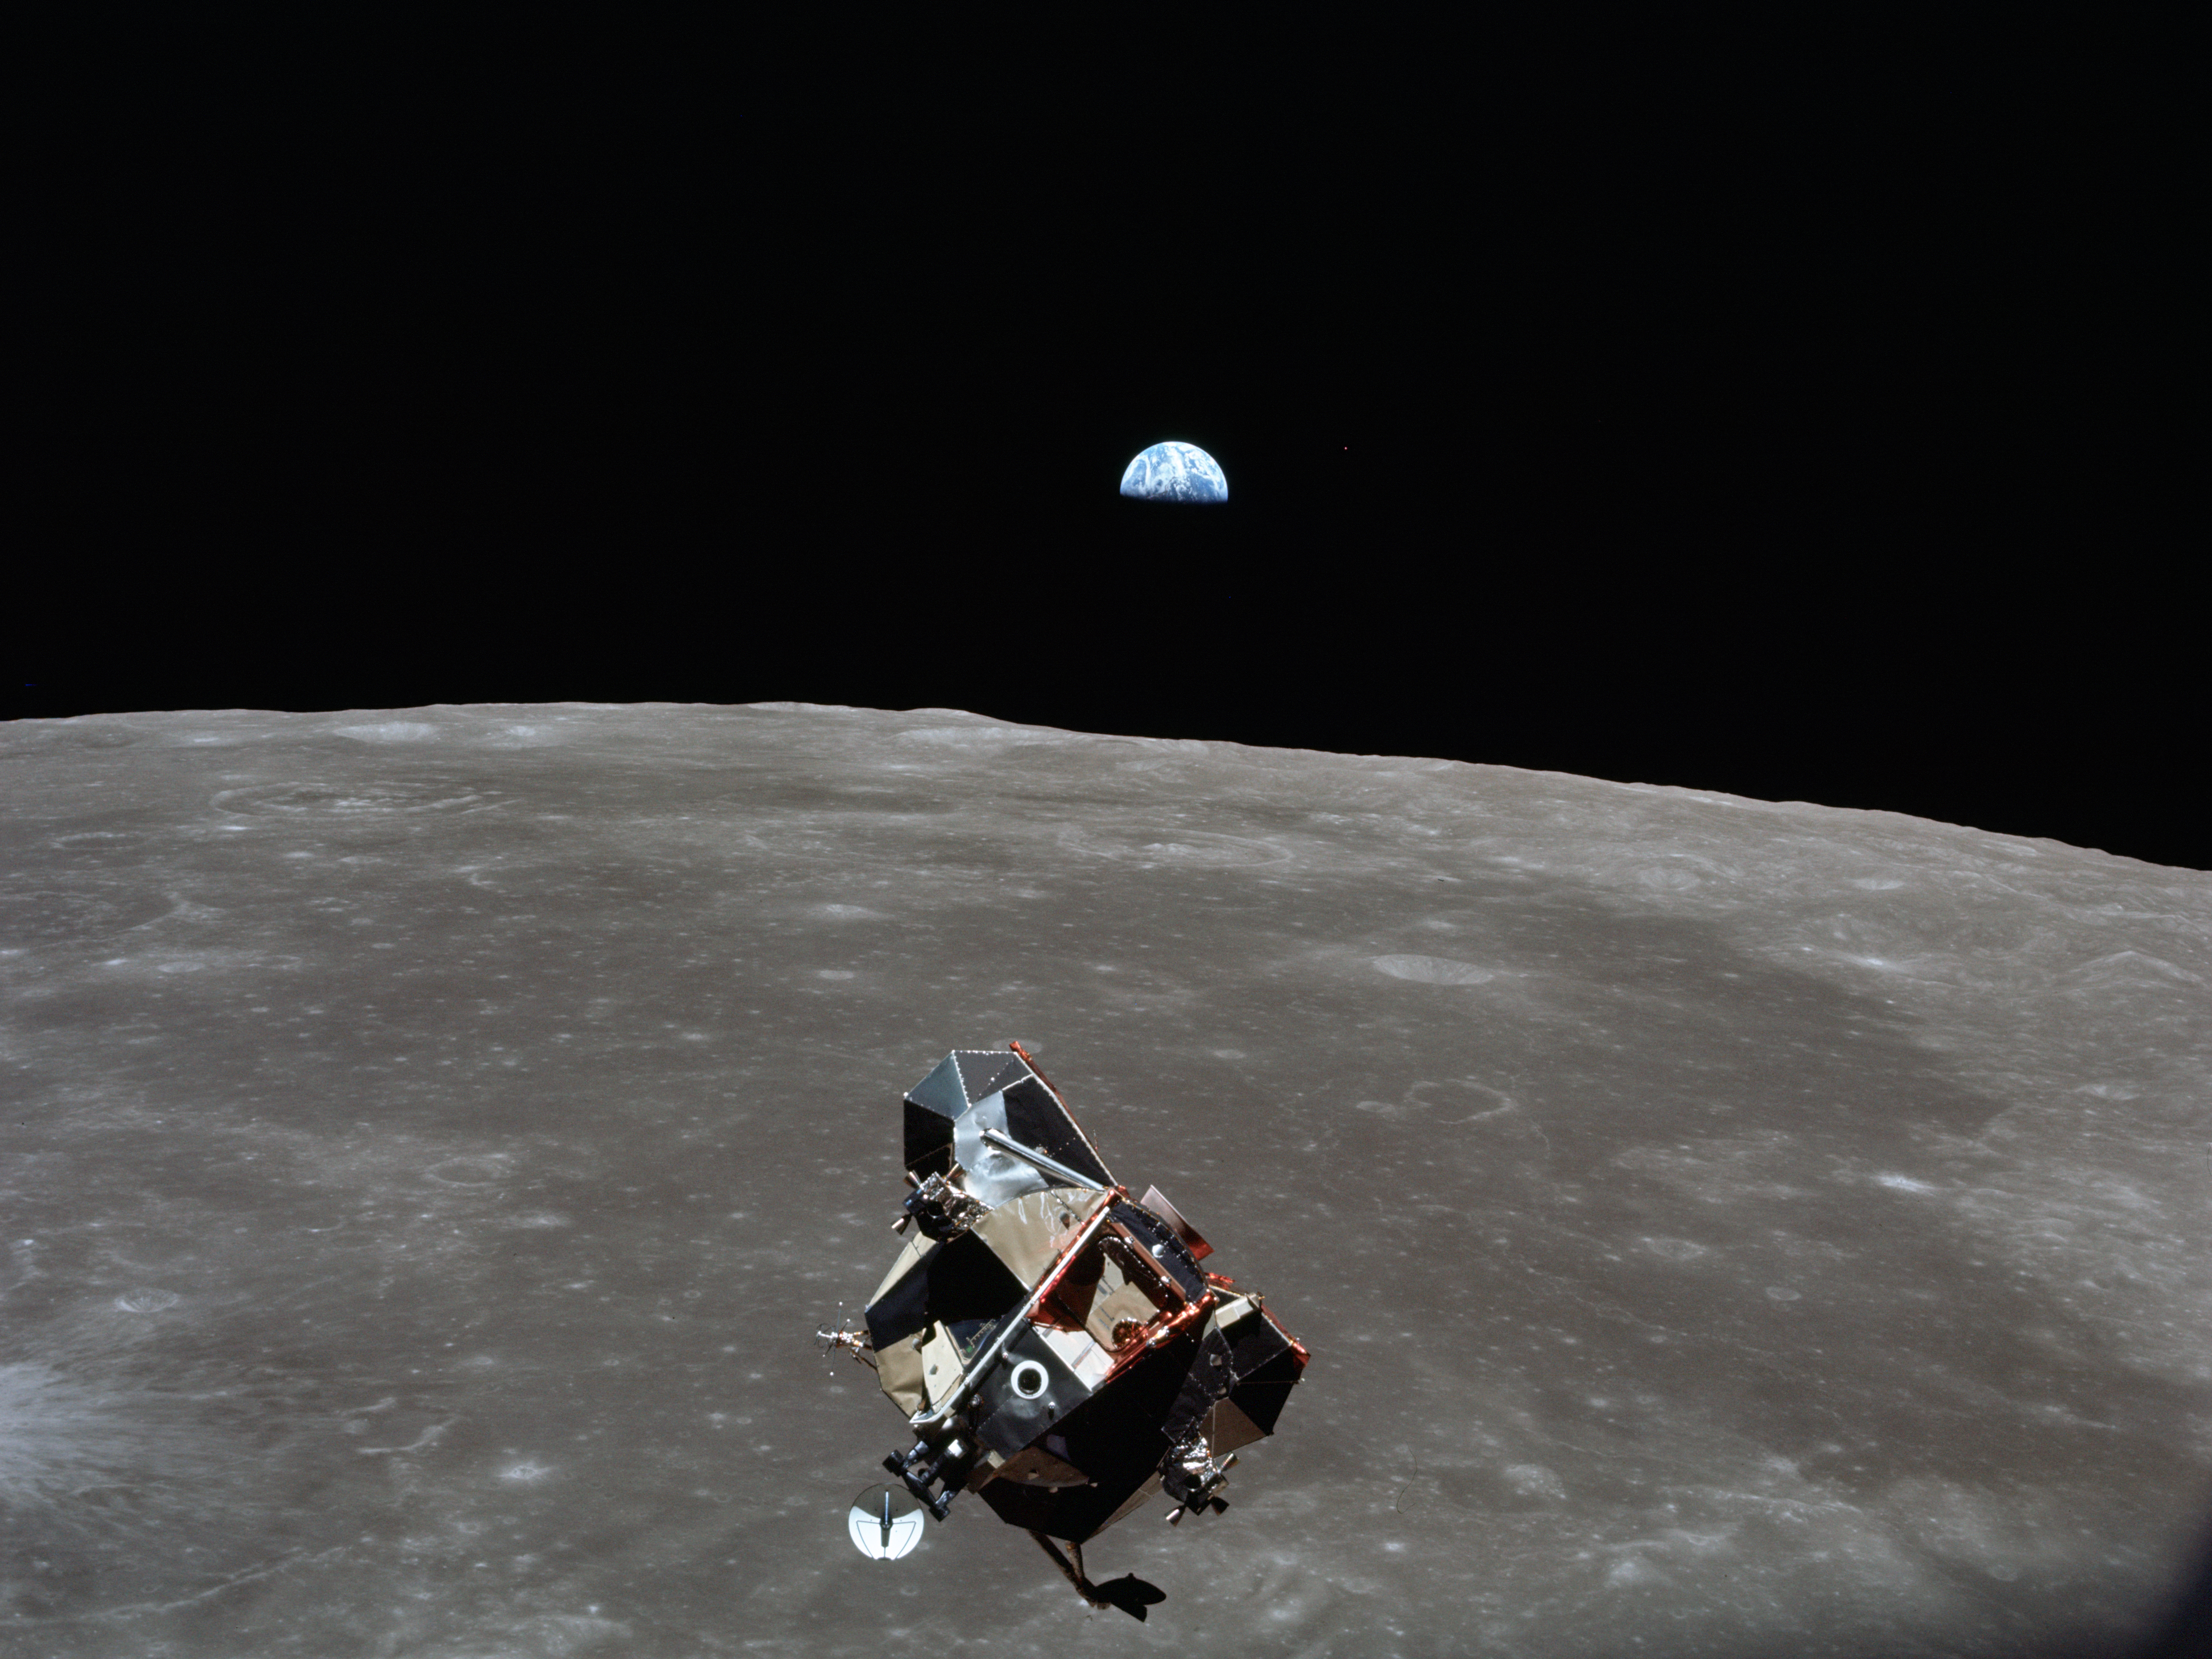 Overview effect image from Apollo 11